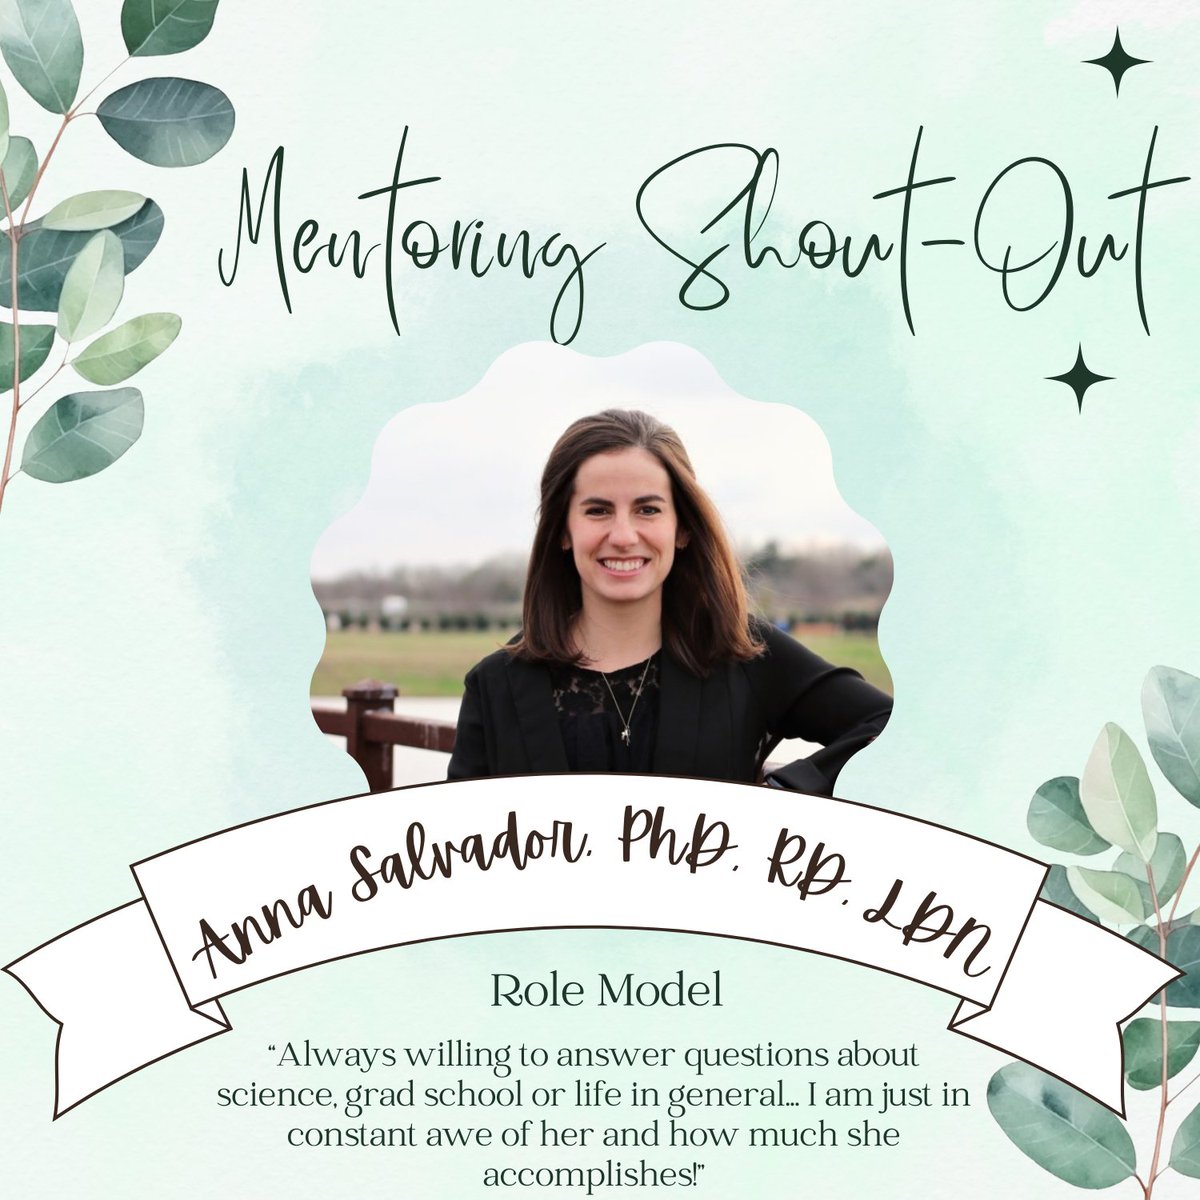 Today's mentoring shout-out is for Anna Salvador, PhD, RD, LDN, Postdoctoral Research Fellow in the UNC Center for Gastrointestinal Biology & Disease. Dr. Salvador was nominated for being a fantastic role model for others around her.